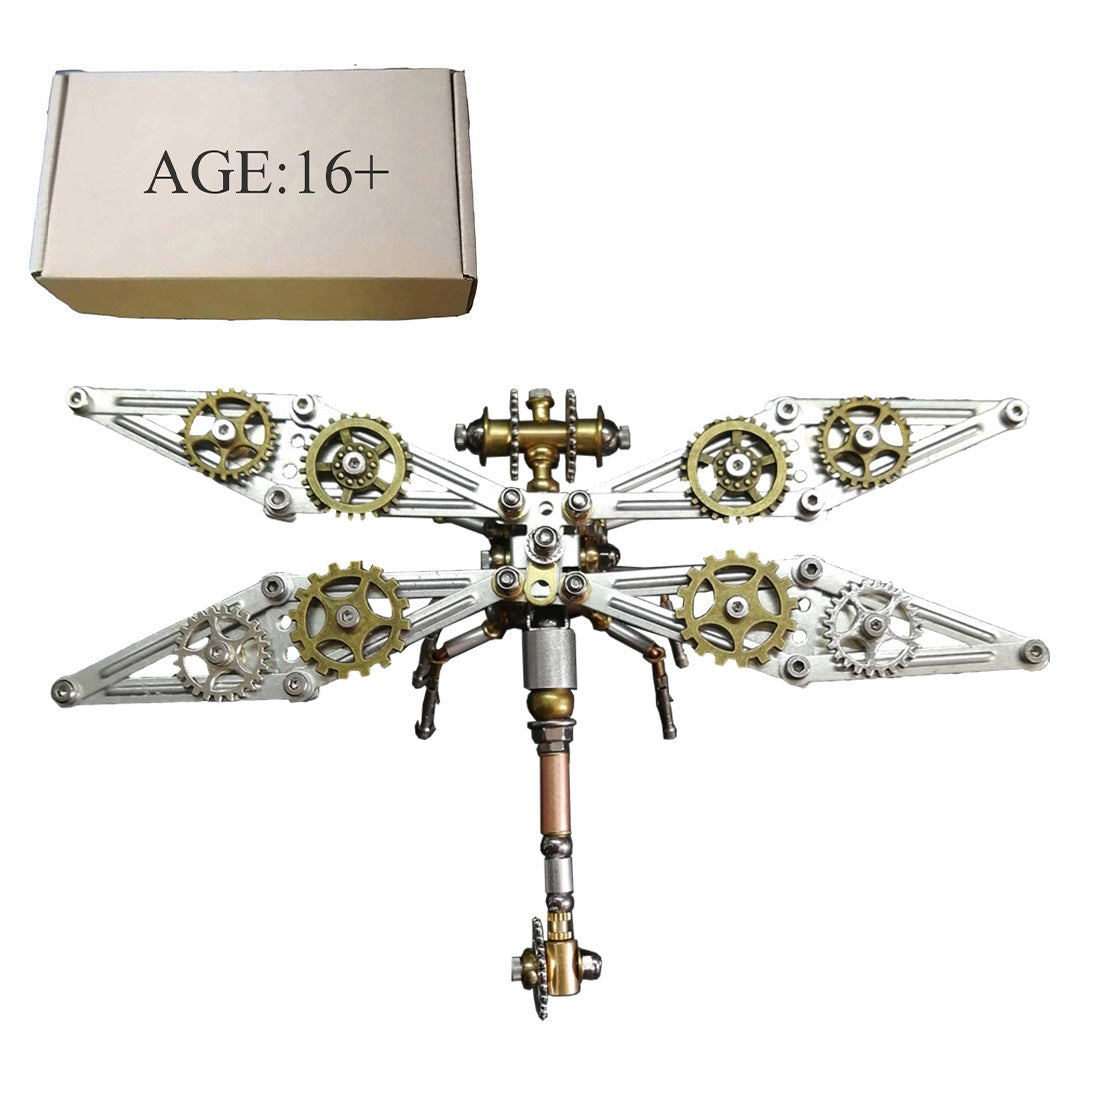 3D Metal Puzzle Dragonfly Punk Insect Assembly Model 200+PCS